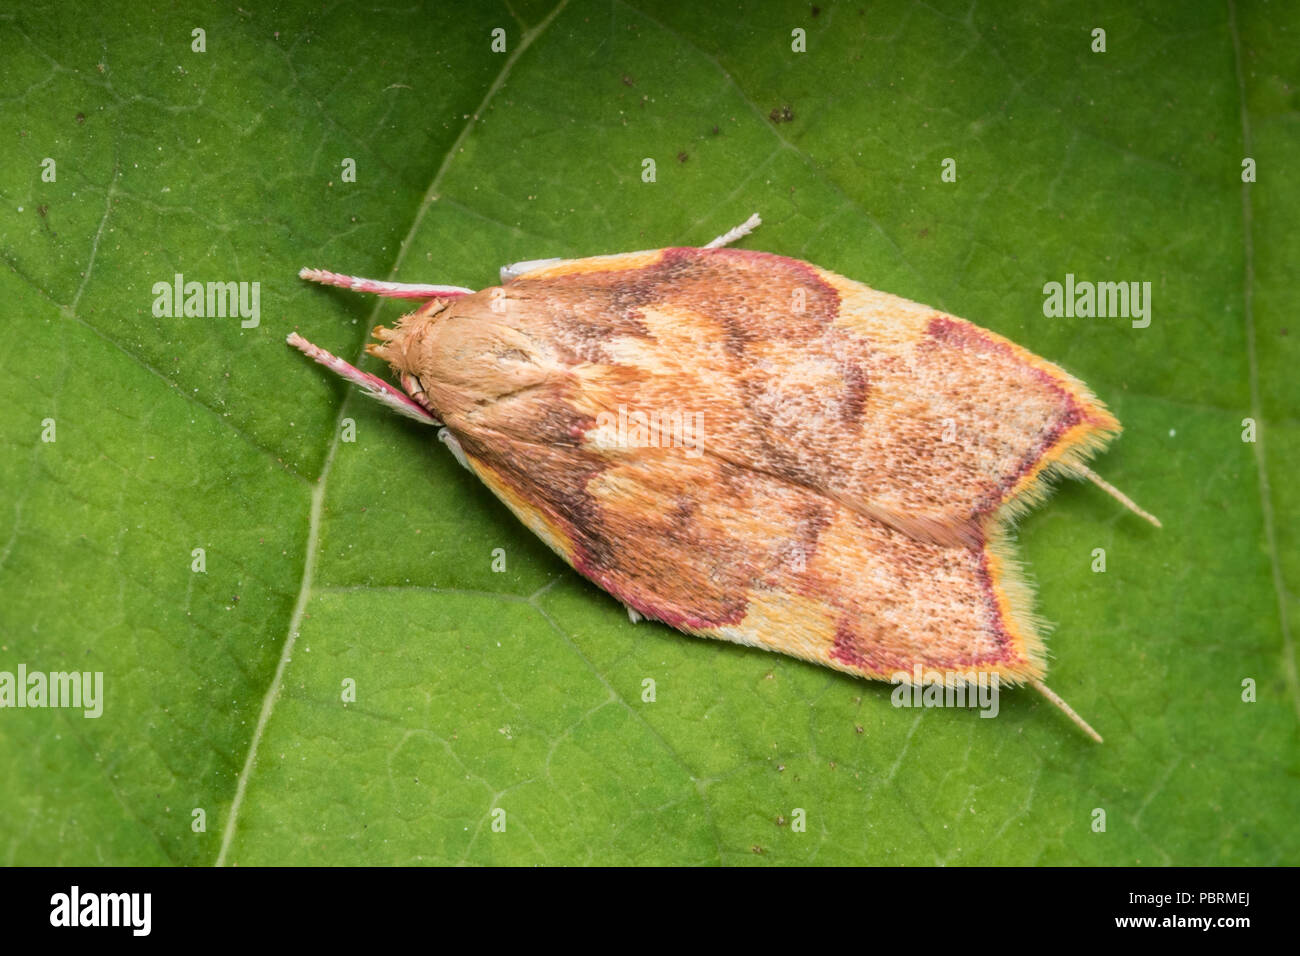 Micromoth Carcina quercana resting on sycamore leaf. Tipperary, Ireland Stock Photo